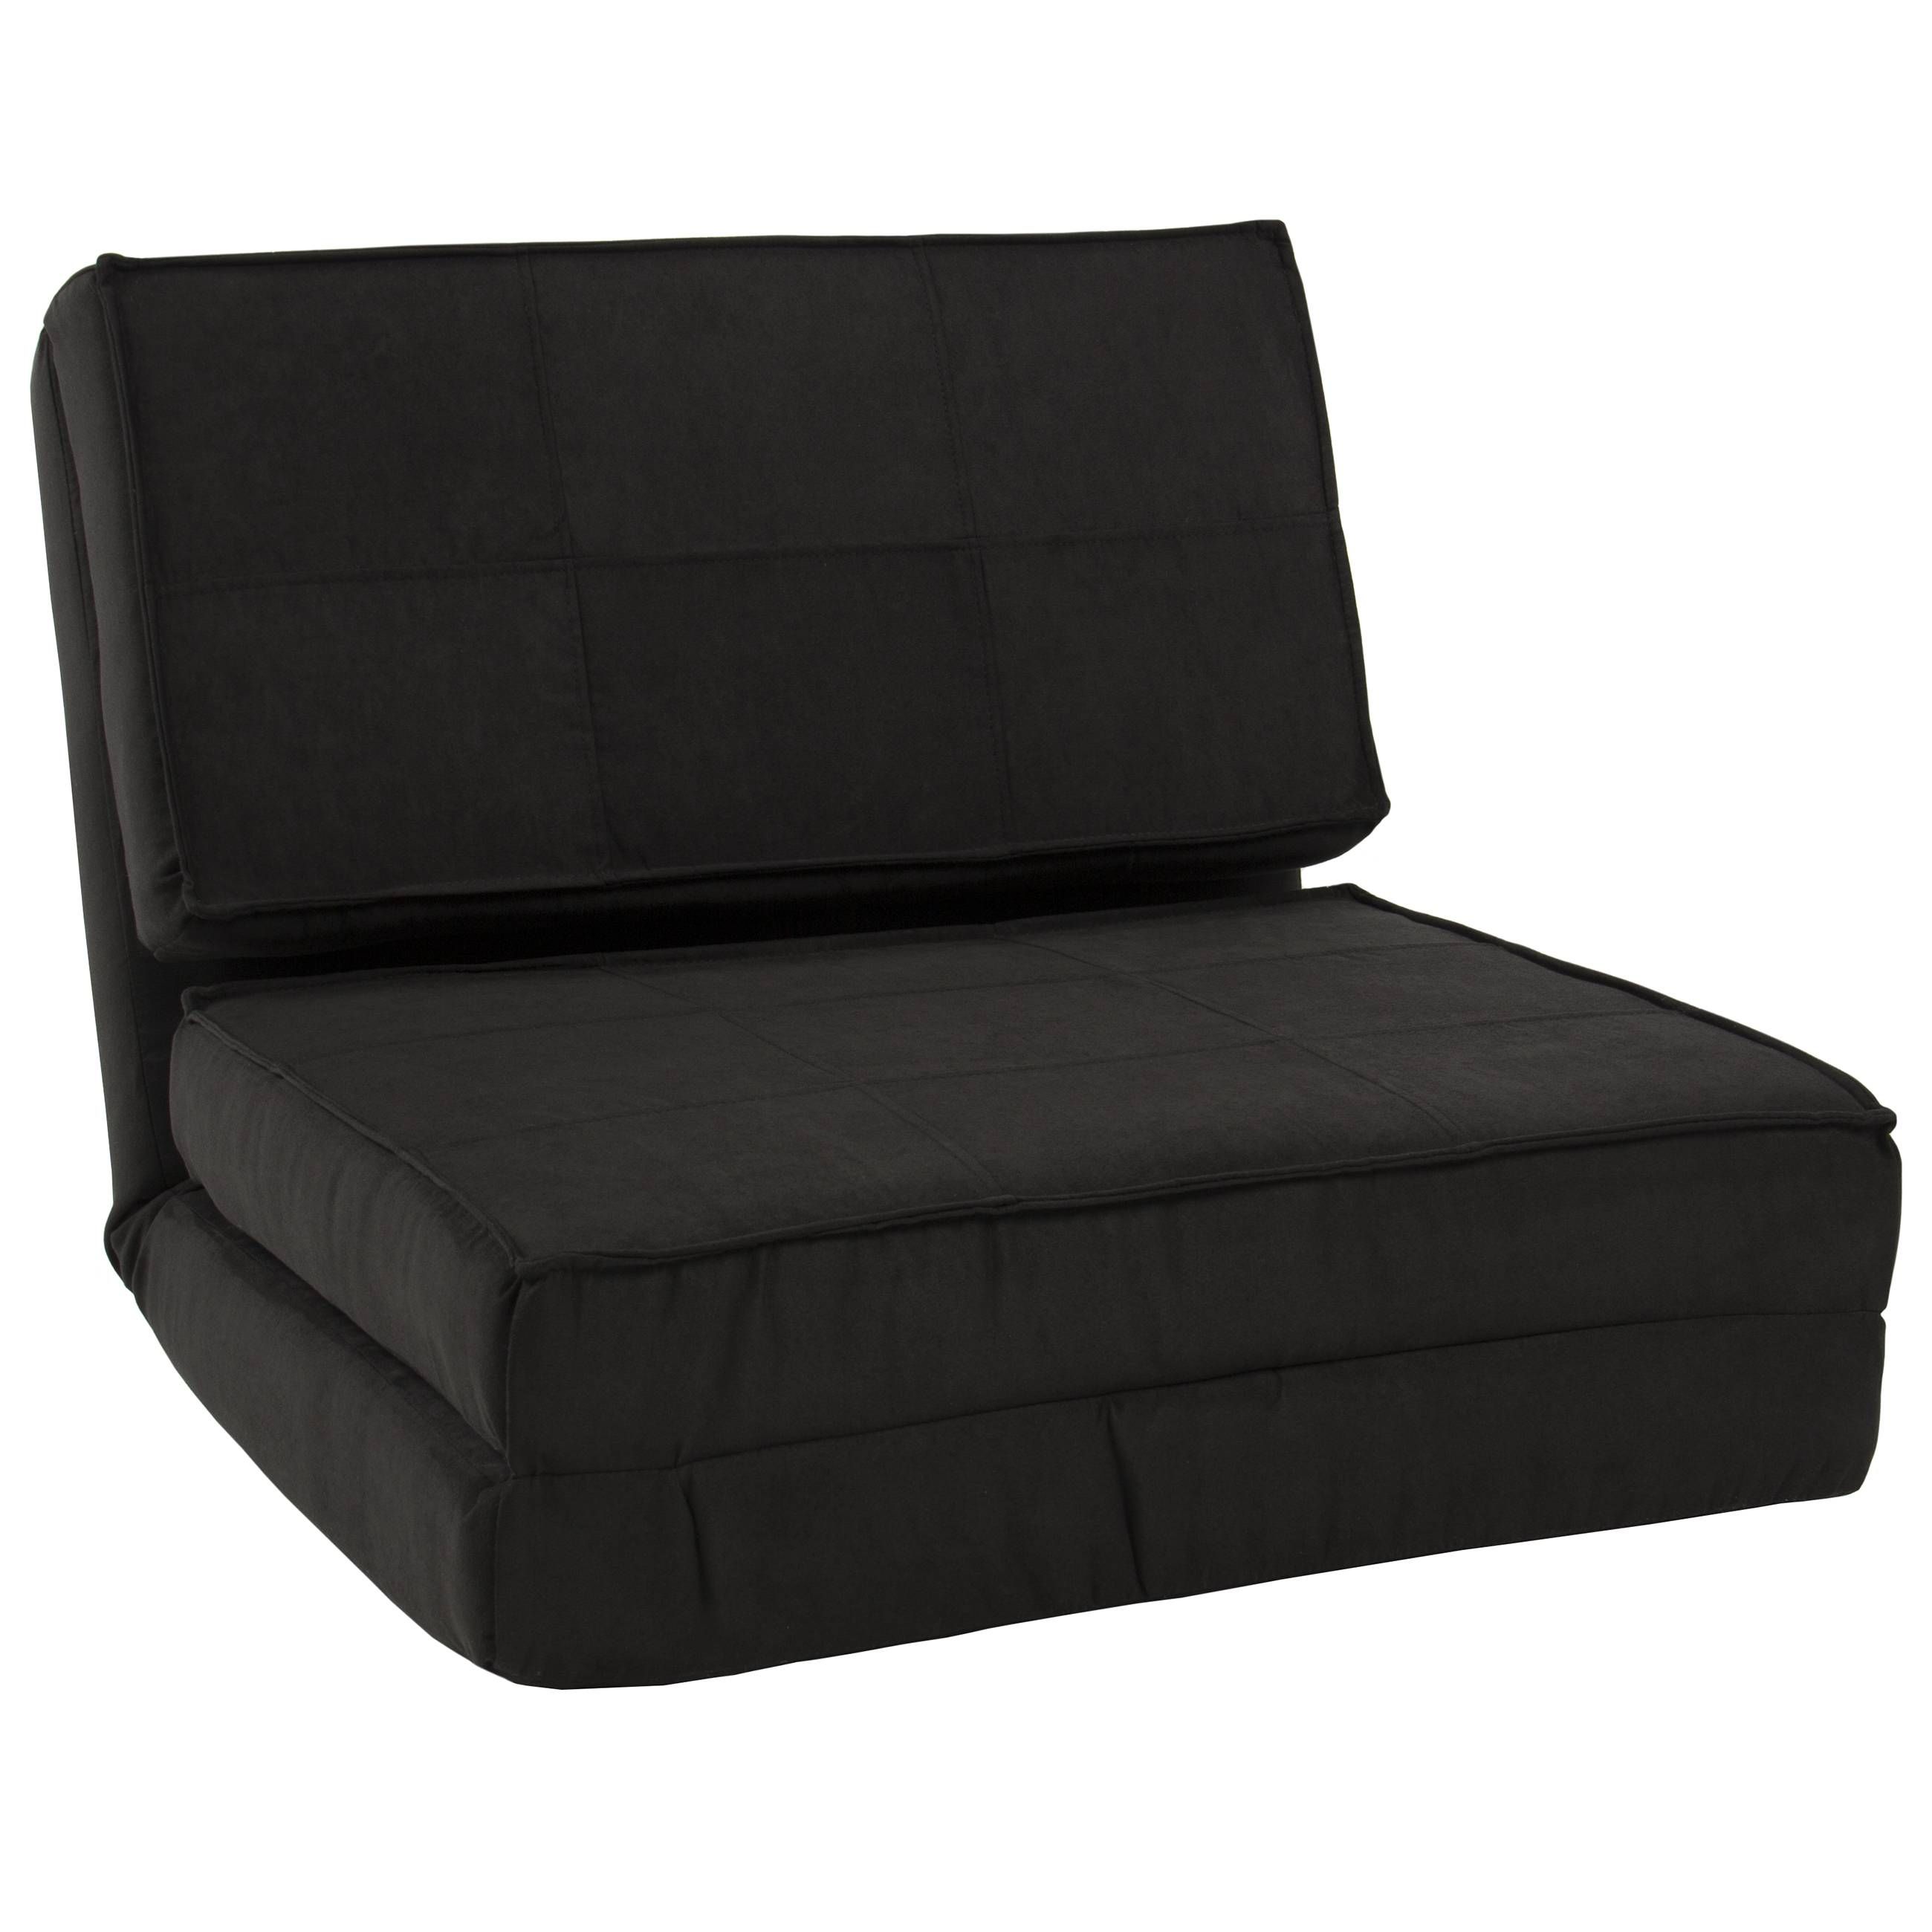 Fold Down Chair Flip Out Lounger Convertible Sleeper Bed Couch With Cheap Single Sofa Bed Chairs (View 15 of 30)